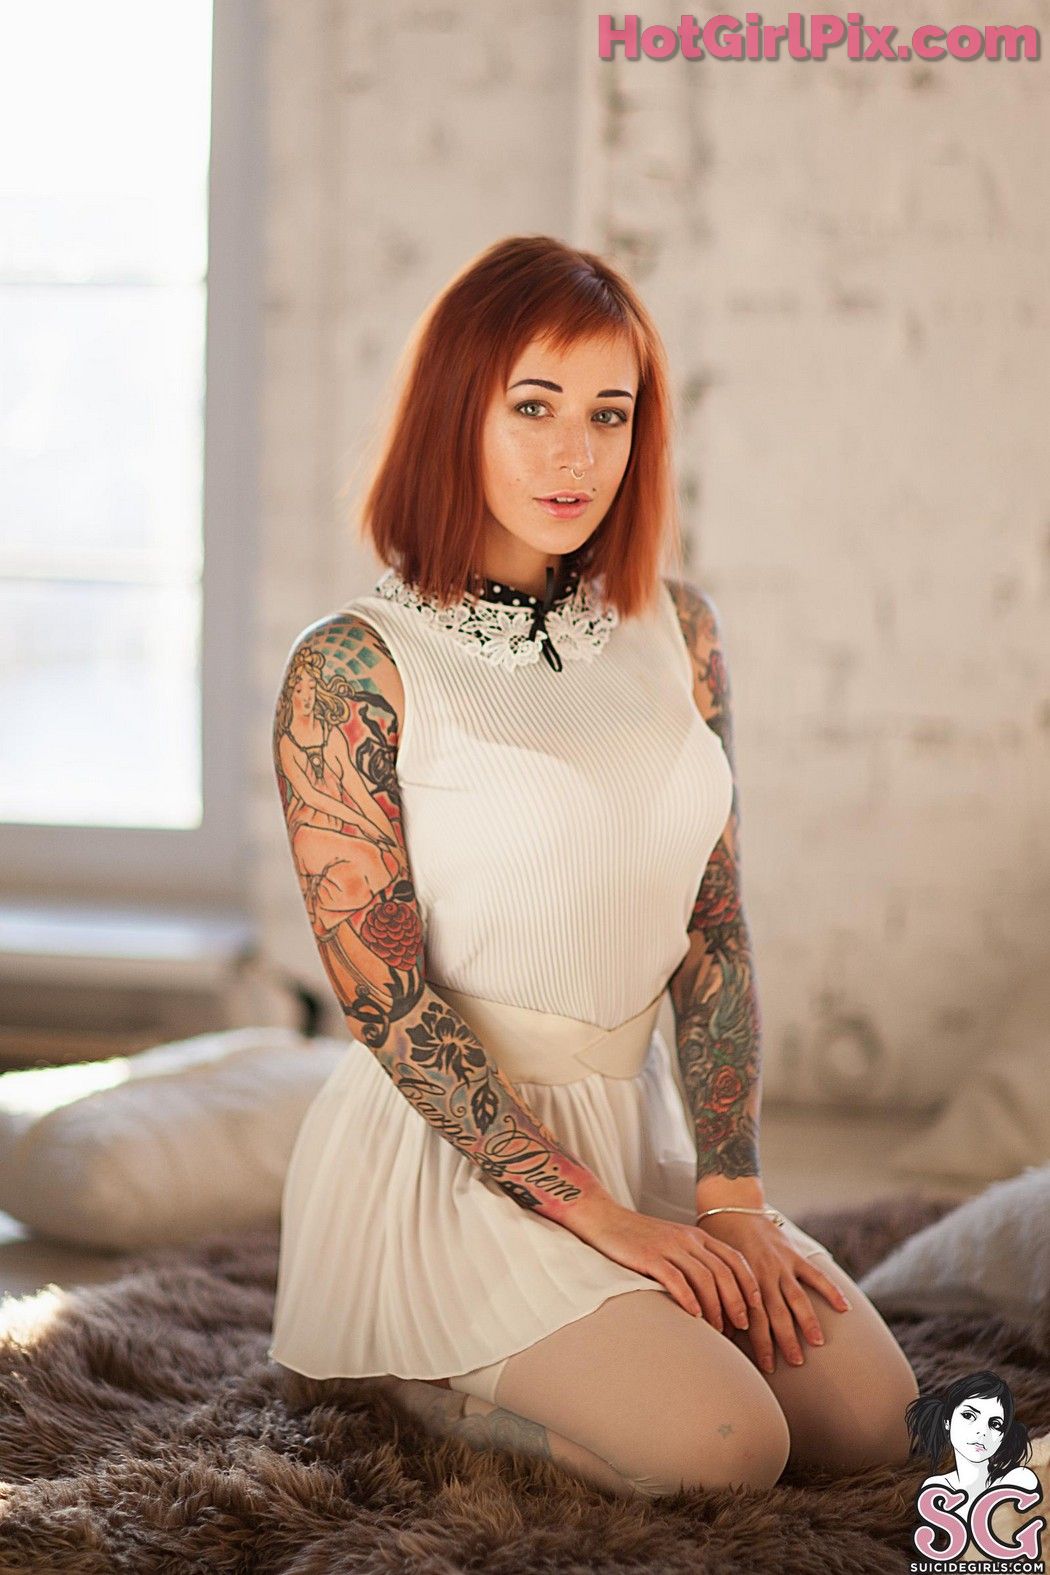 [Suicide Girls] Janesinner - Young and Beautiful